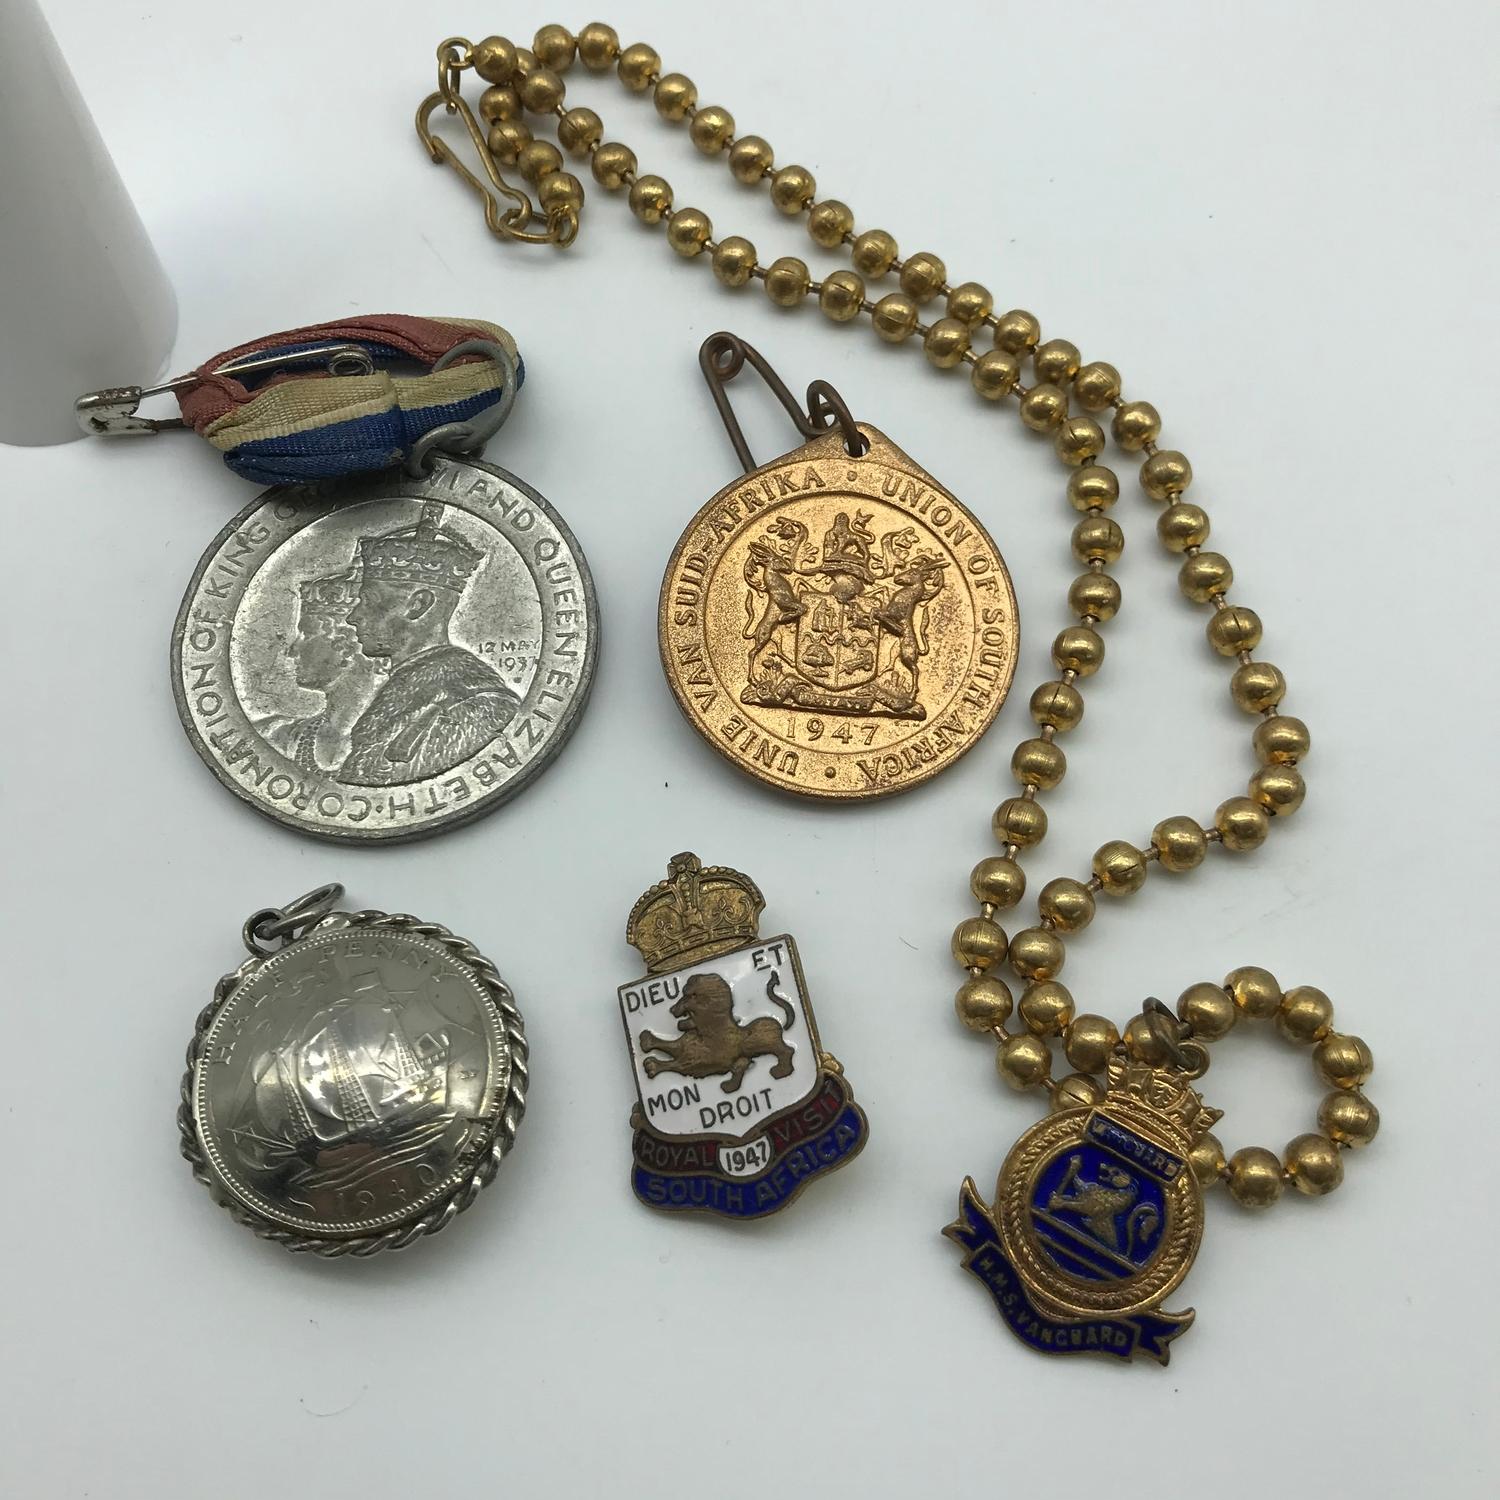 A Lot of two commemorative medals, 1940 silver coin pendant, Royal Visit South Africa 1947 badge and